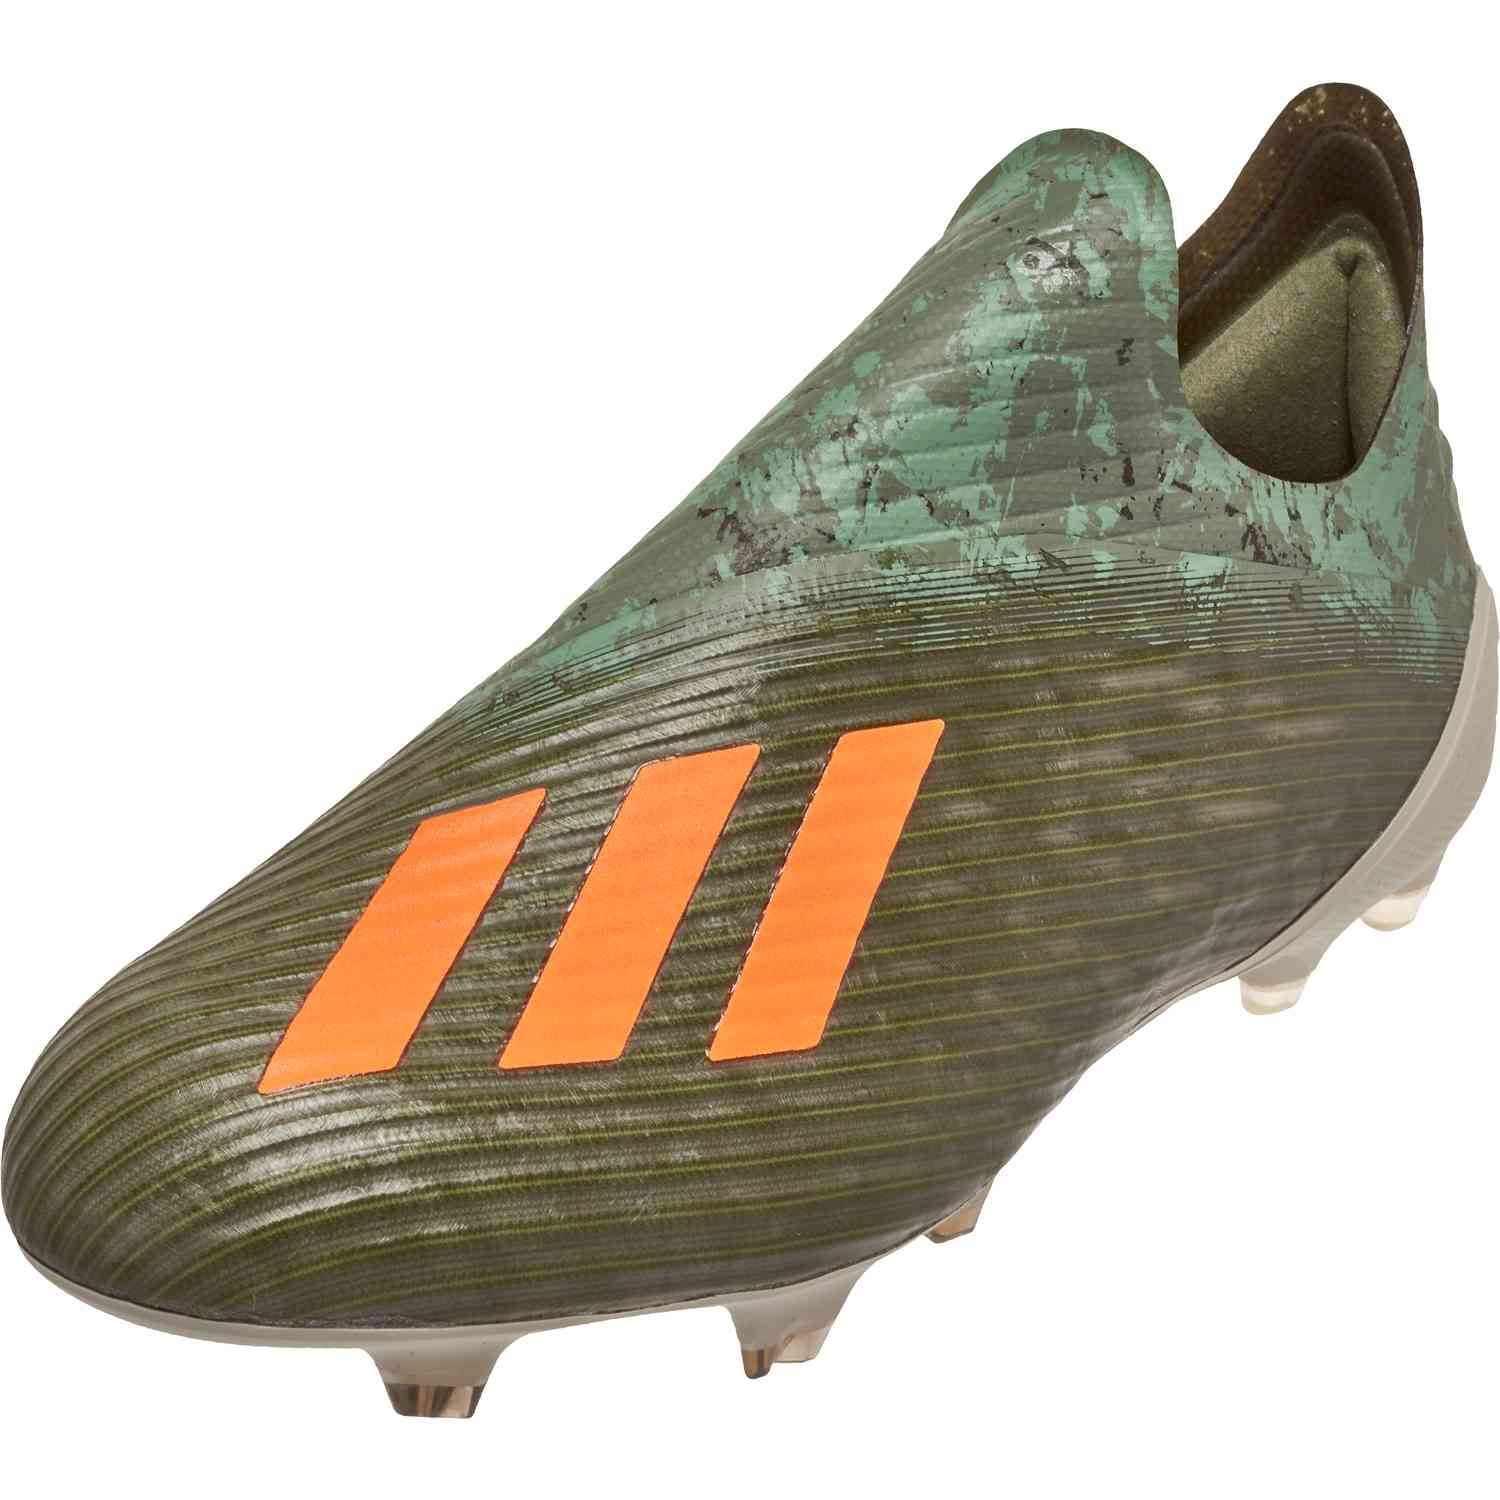 x 19 firm ground cleats